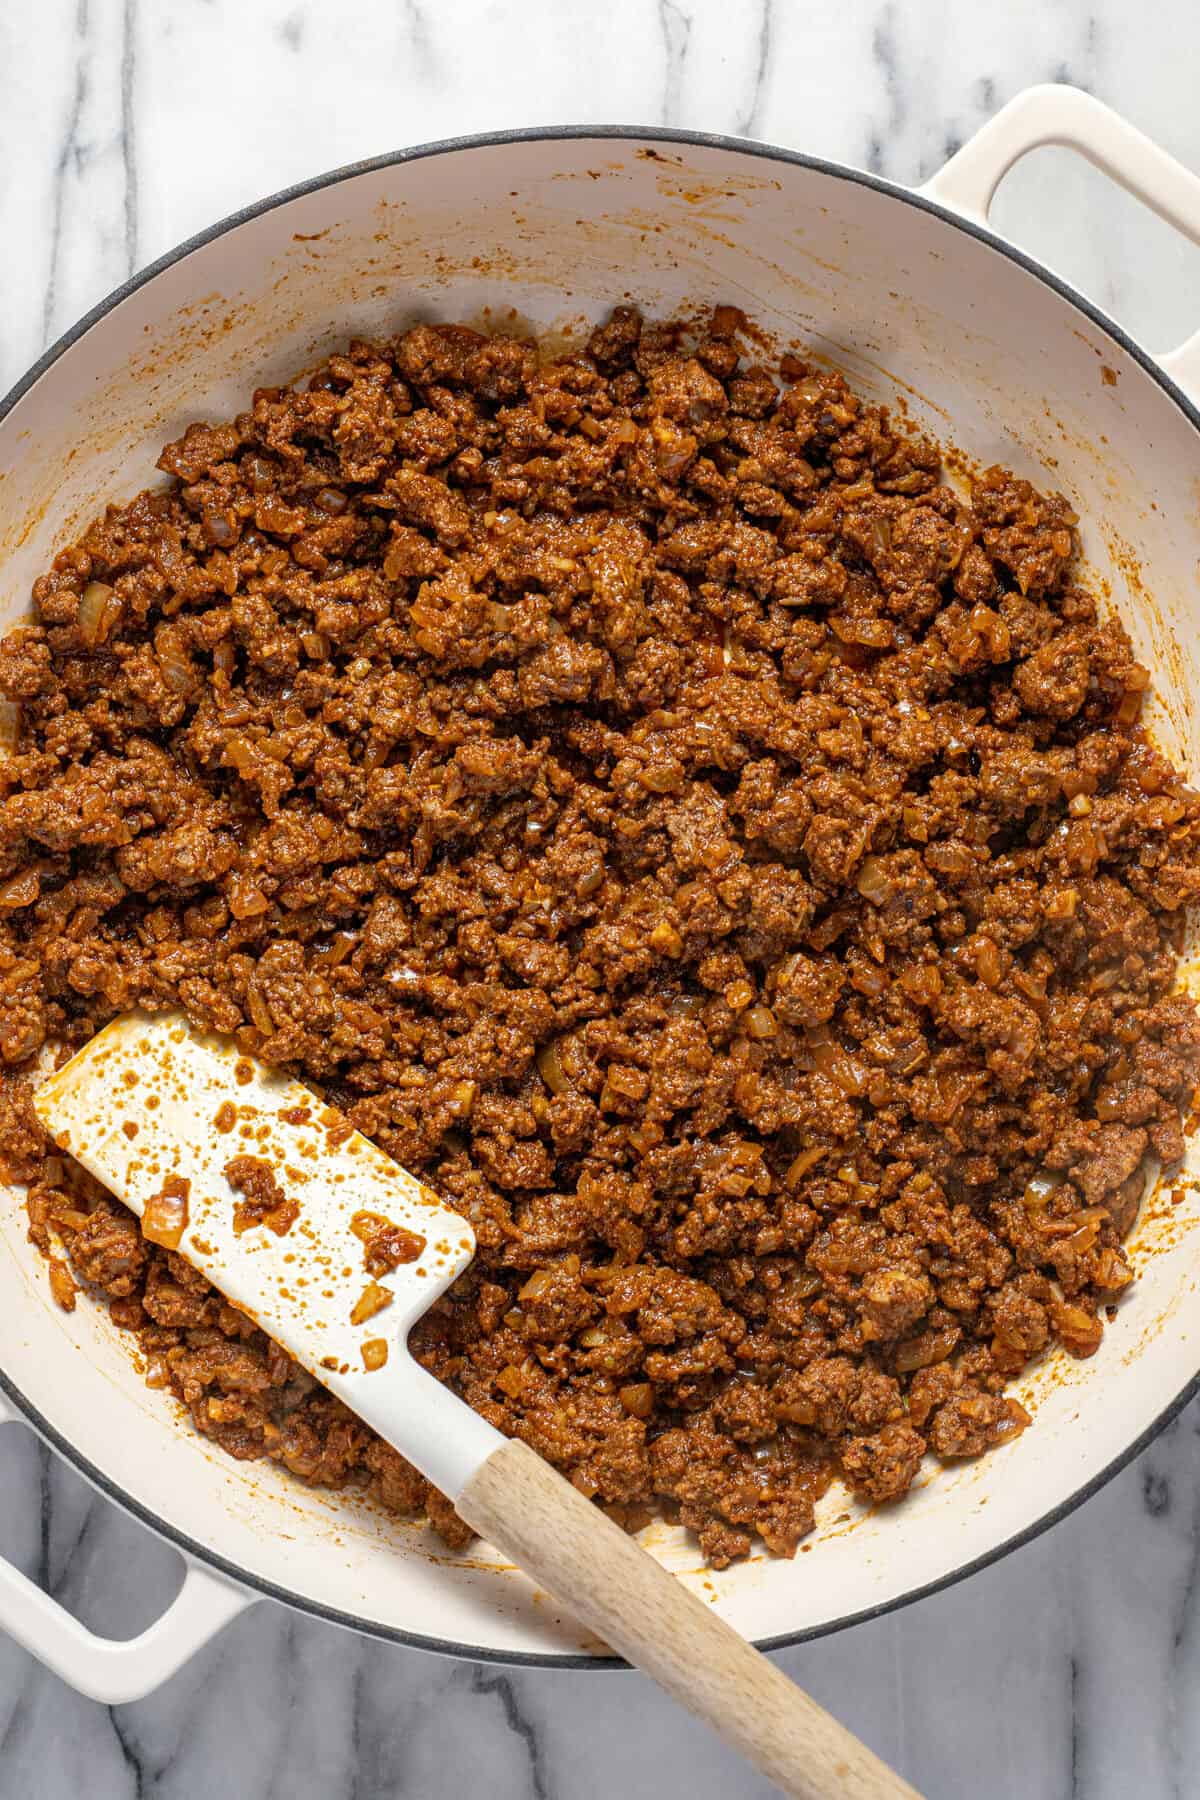 Large white sauté pan filled with homemade taco meat.